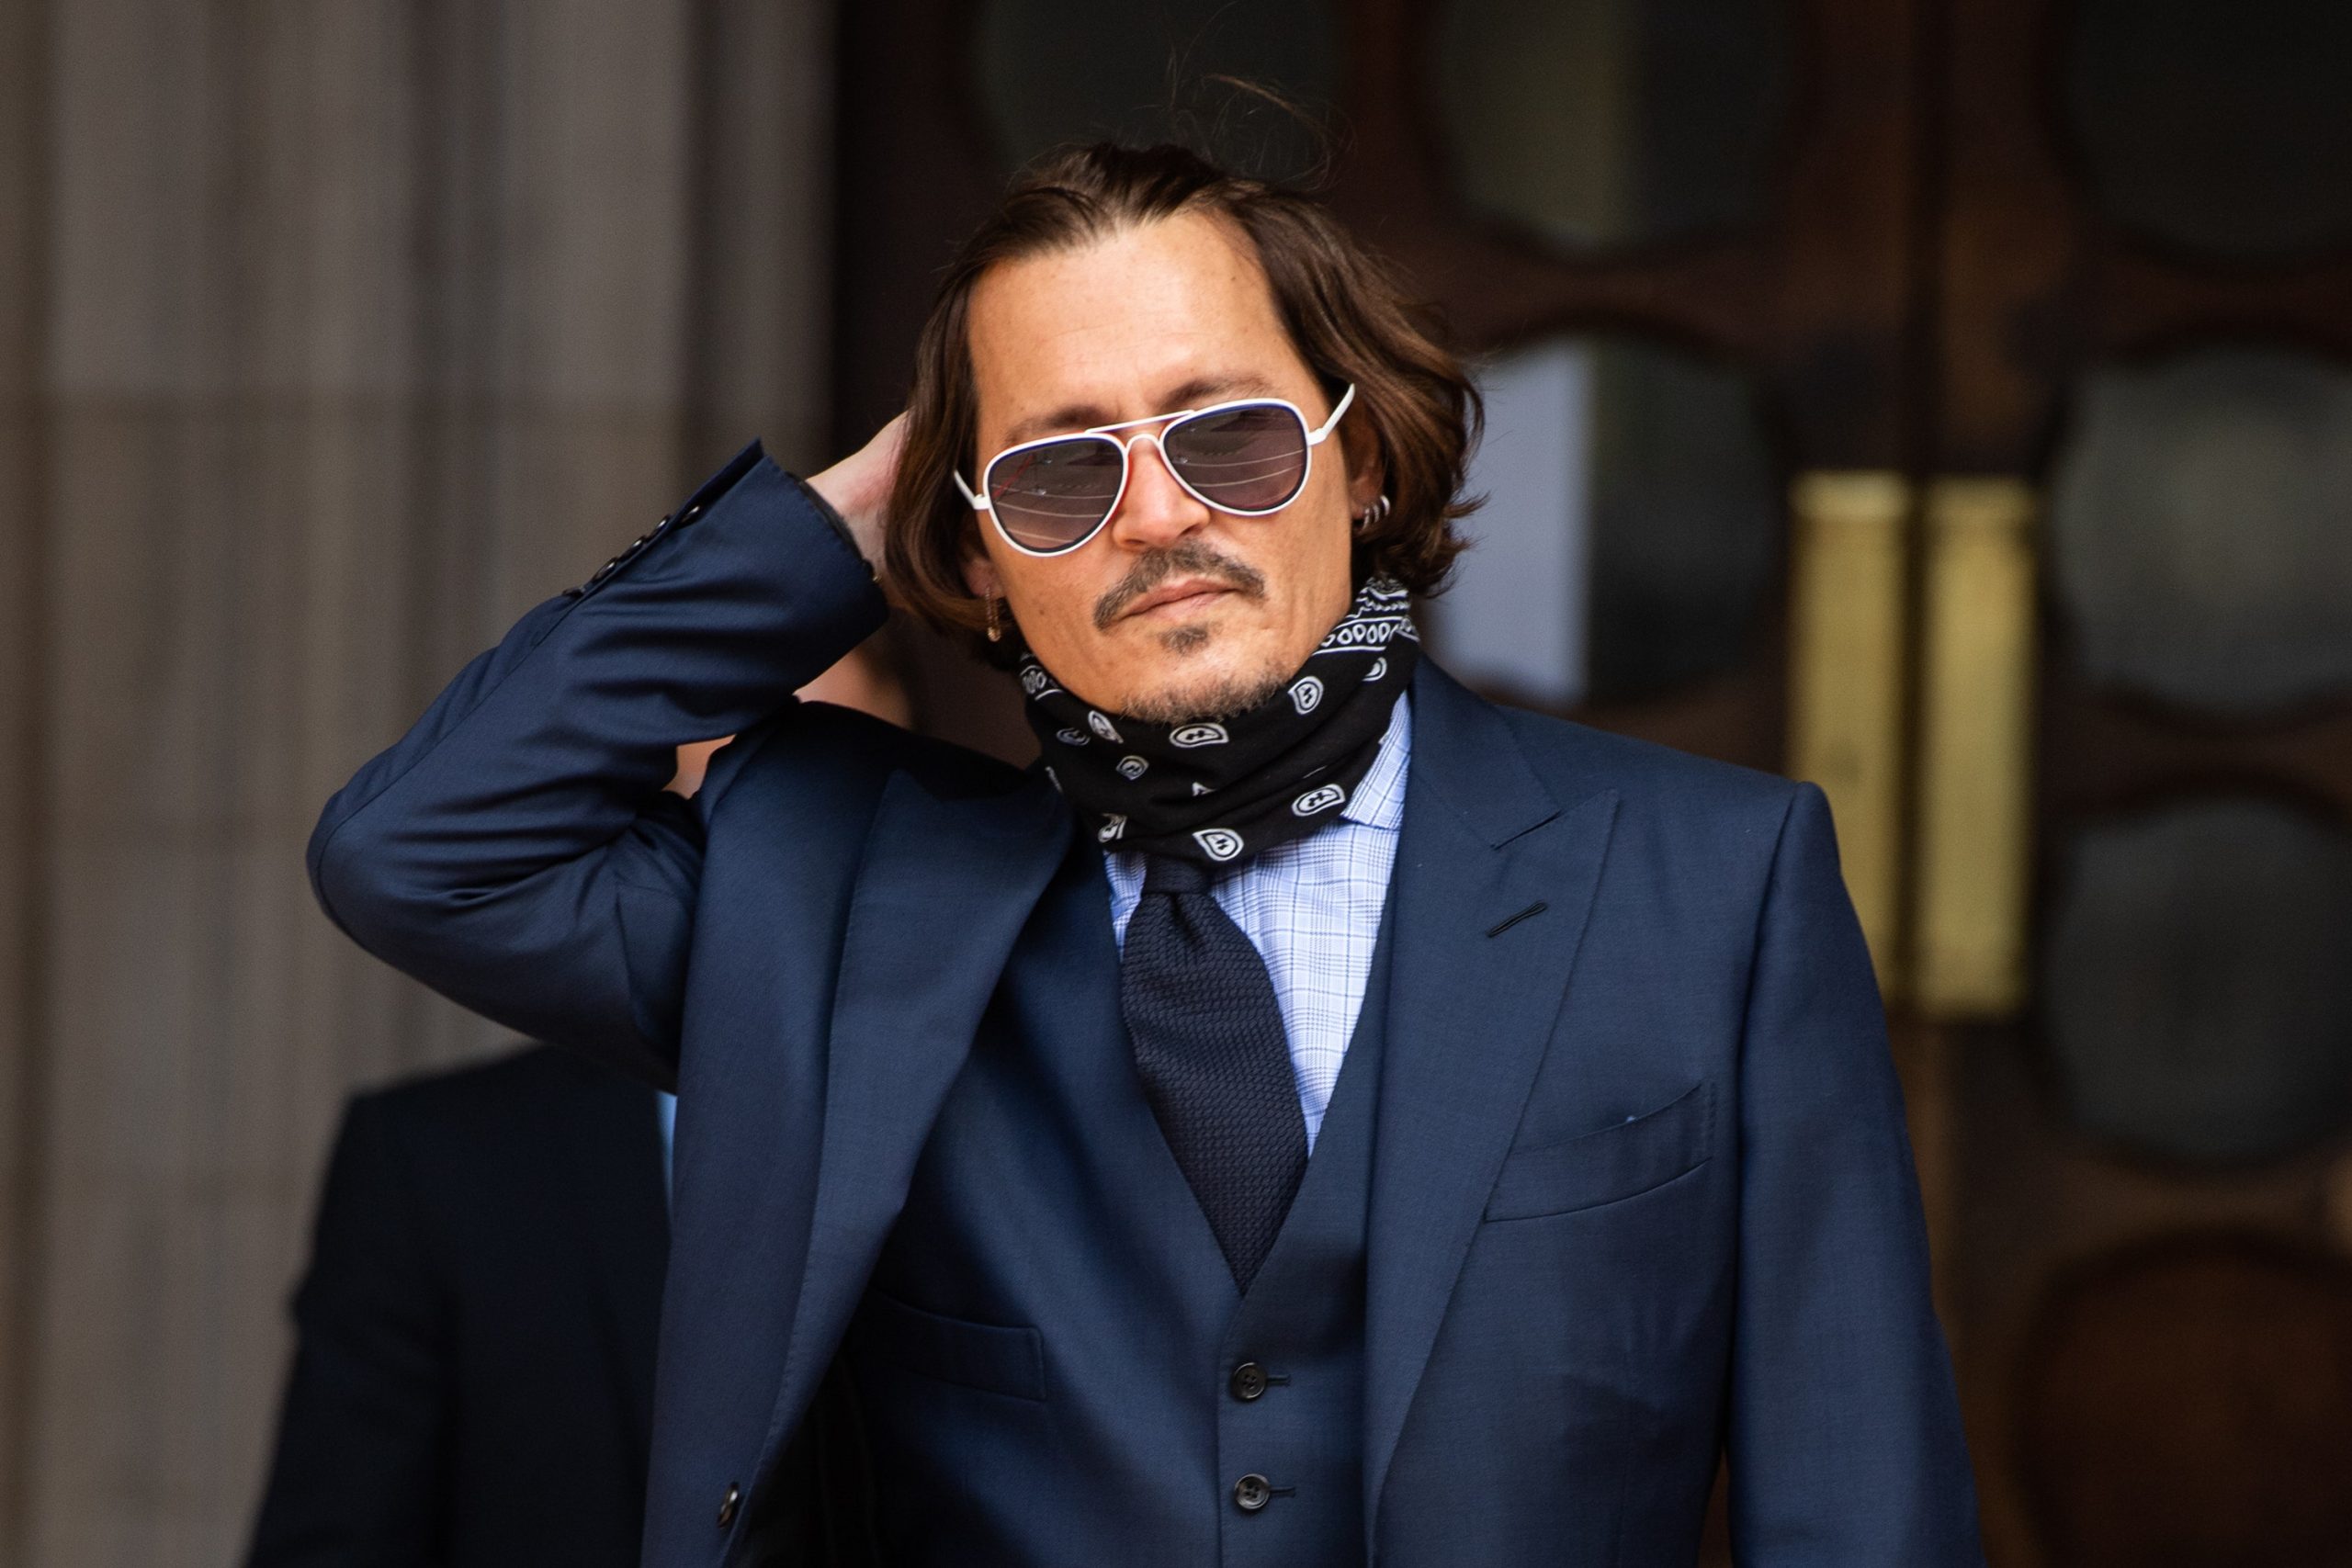 Johnny Depp Wiki, Bio, Age, Net Worth, and Other Facts